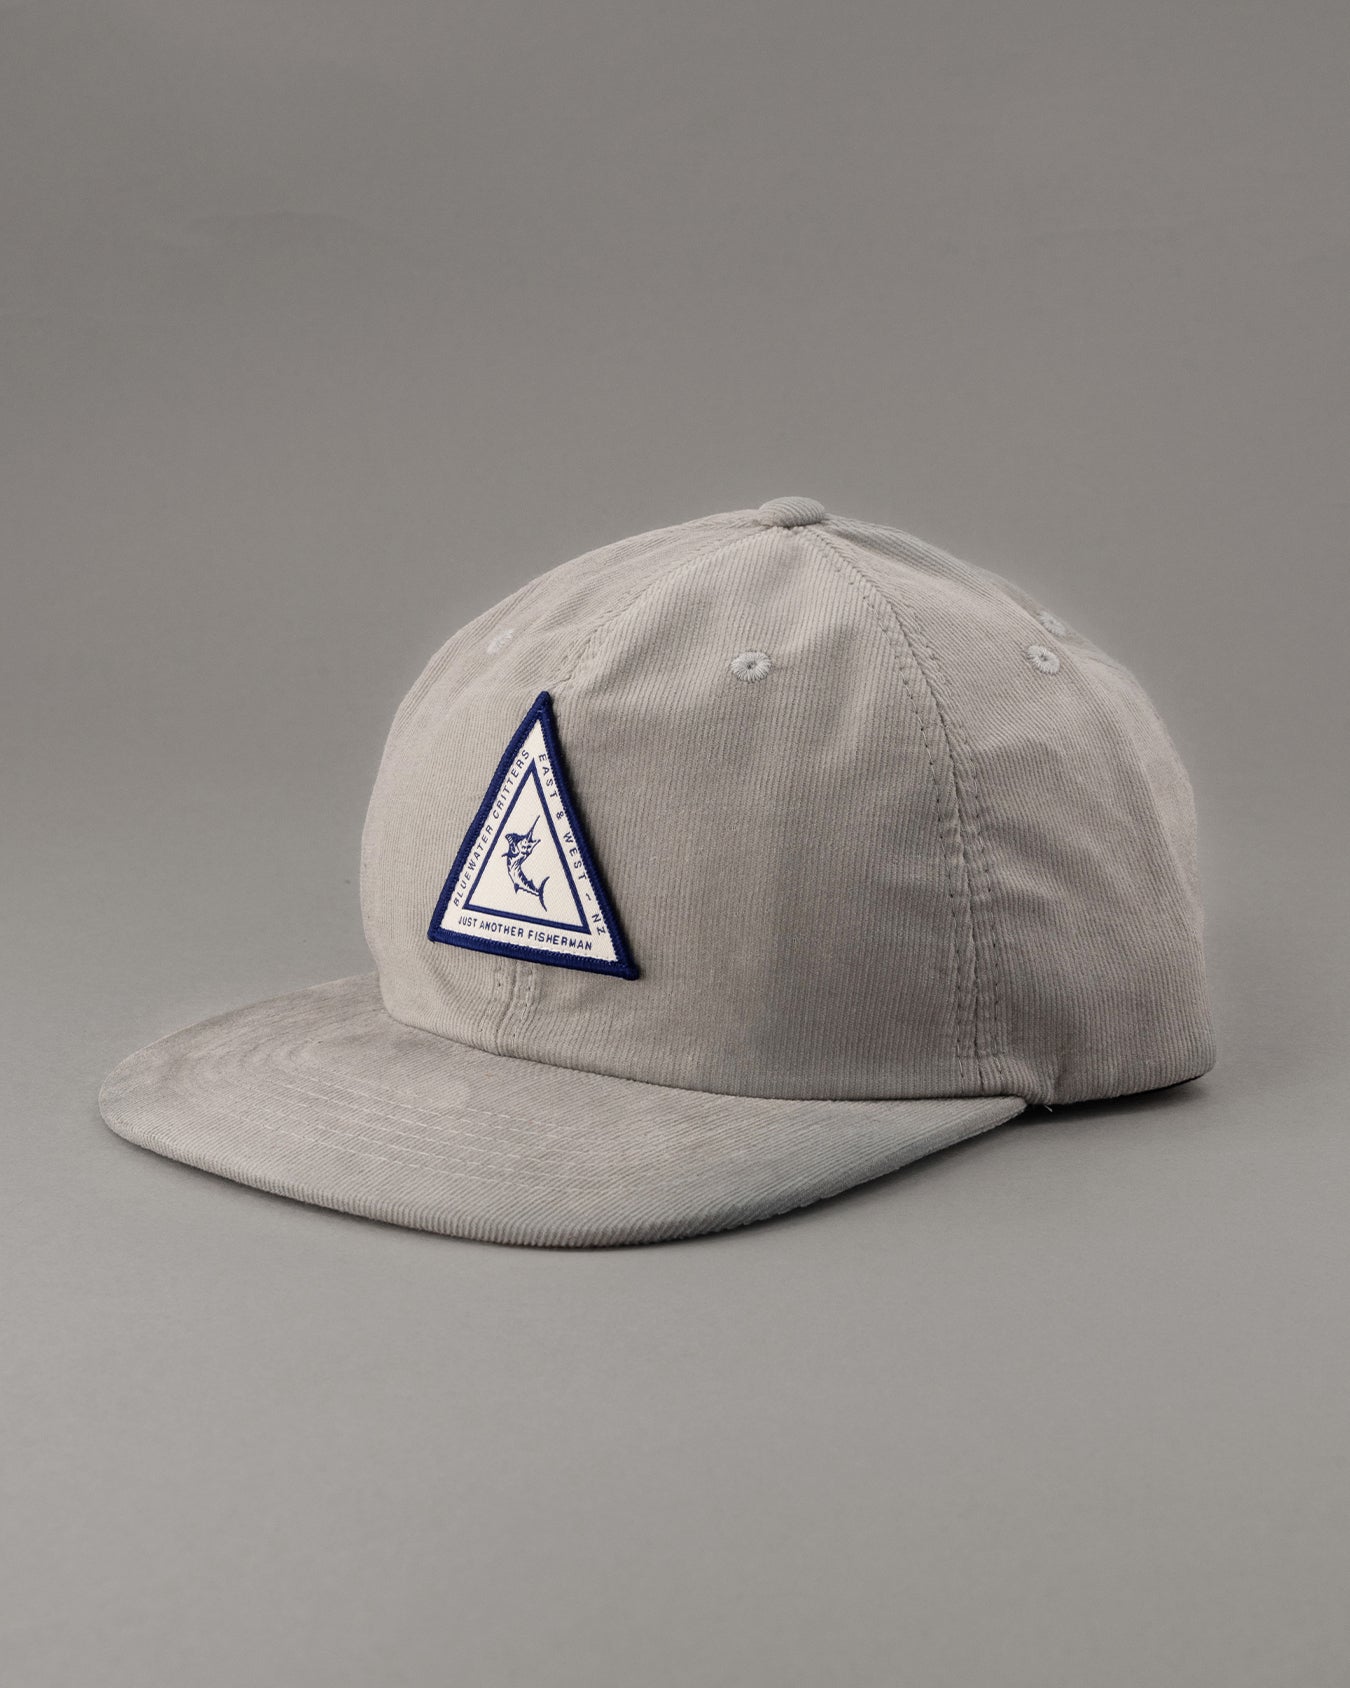 Just Another Fisherman Angled Marlin Cap - Grey